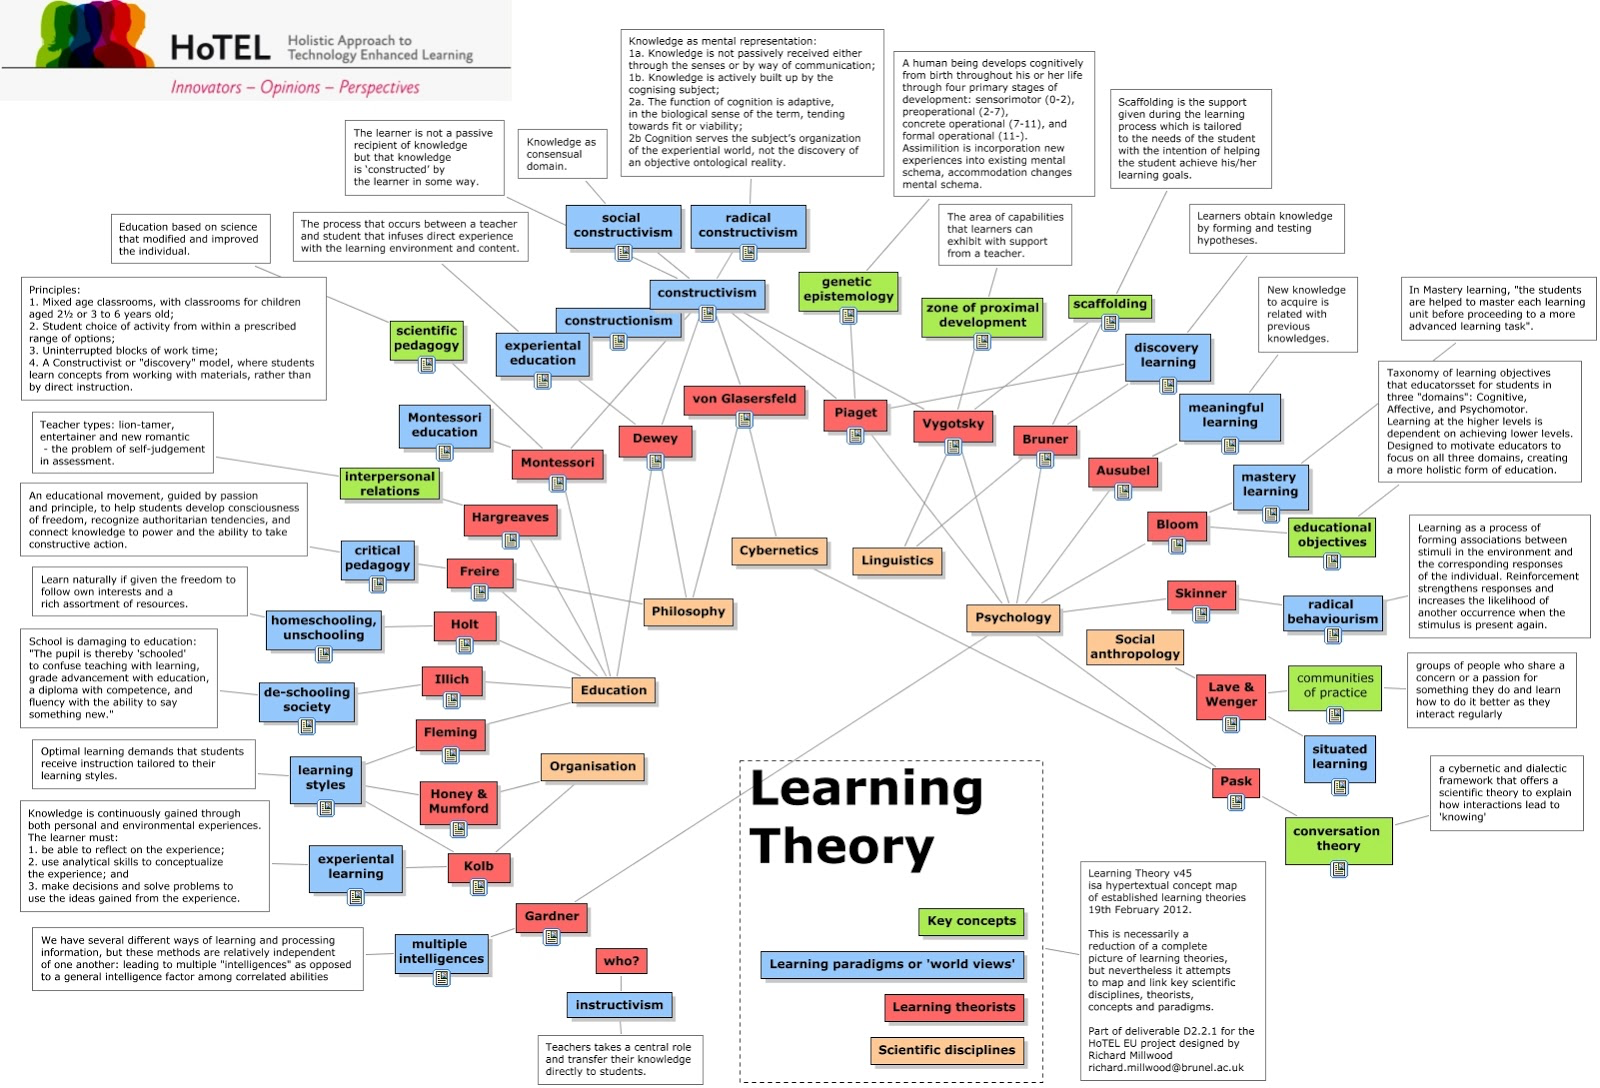 The figure shows a dendrogram of the main learning theories that are currently available. The information is organized across four main levels; the Scientific Discipline (such as Organization, Education, Philosophy, etc), the Learning Theorists (such as Montessori and Bloom), the Learning Paradigms (such as Behaviourism, Constructivism), and the key concepts.